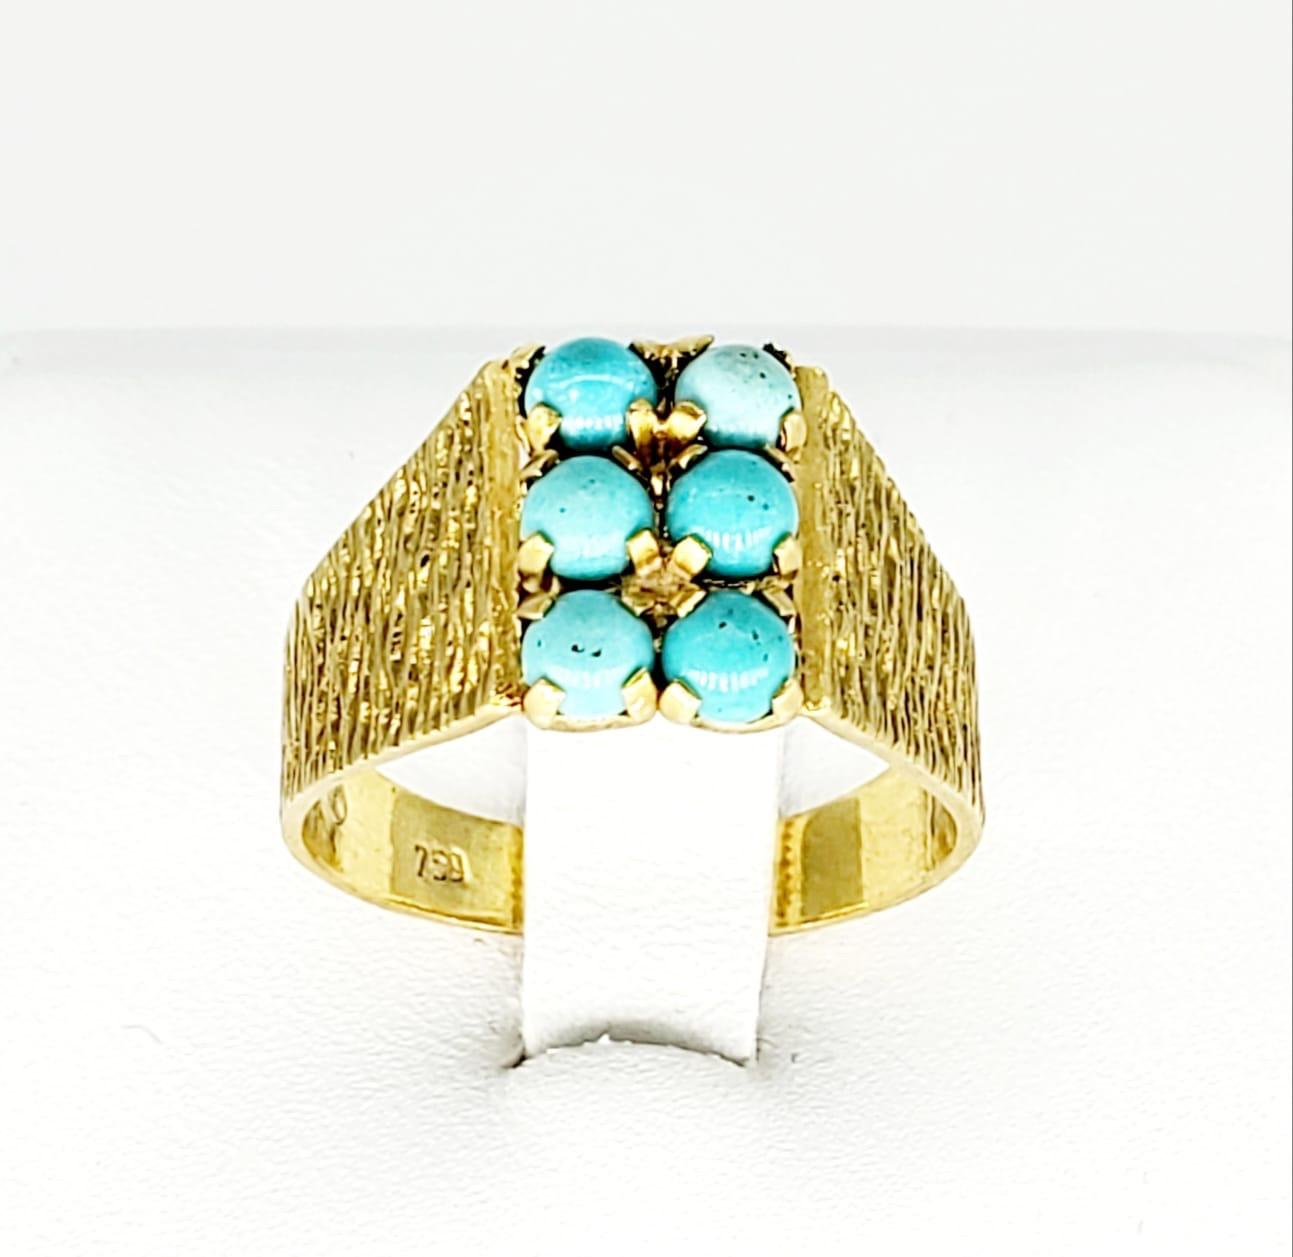 Vintage Turquoise Wood Bark Design Cocktail Ring 18k Gold. The ring features 6 round turquoise gemstones on a wood bark design through out the ring. The ring weights 5 grams and is a size 7